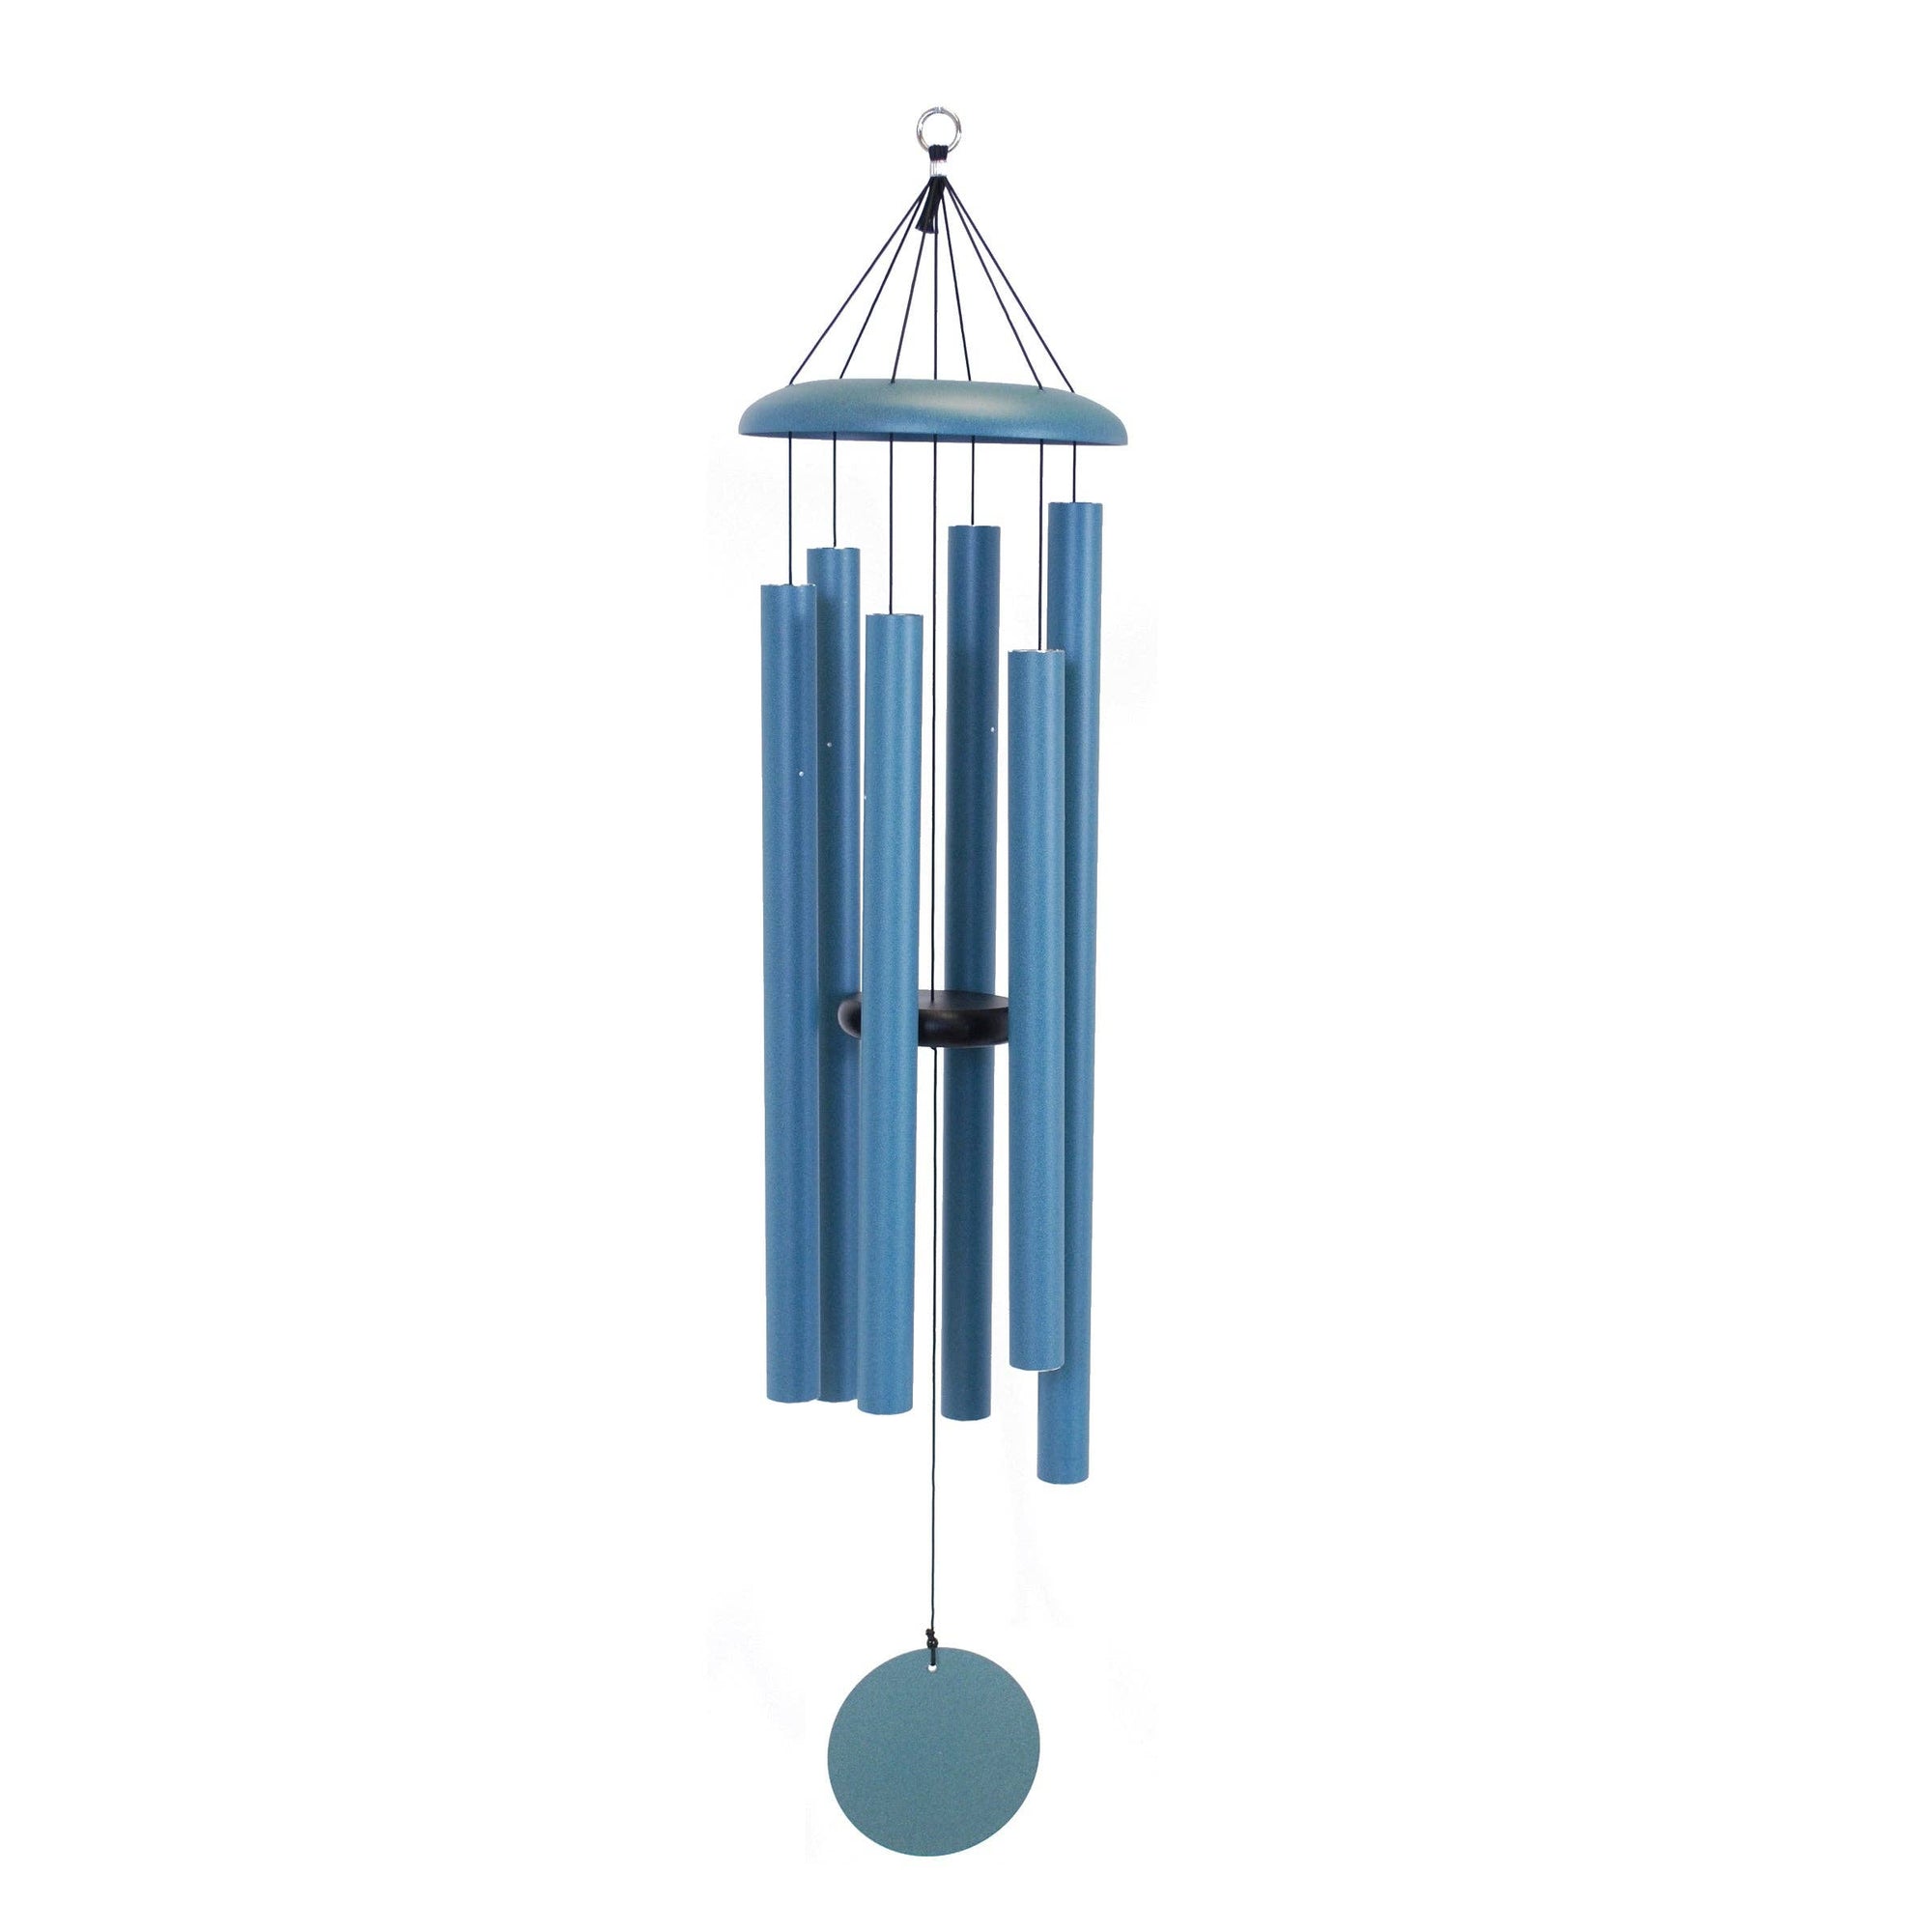 A Corinthian Bells® 50-inch wind chime with blue tubes that creates soothing tones.